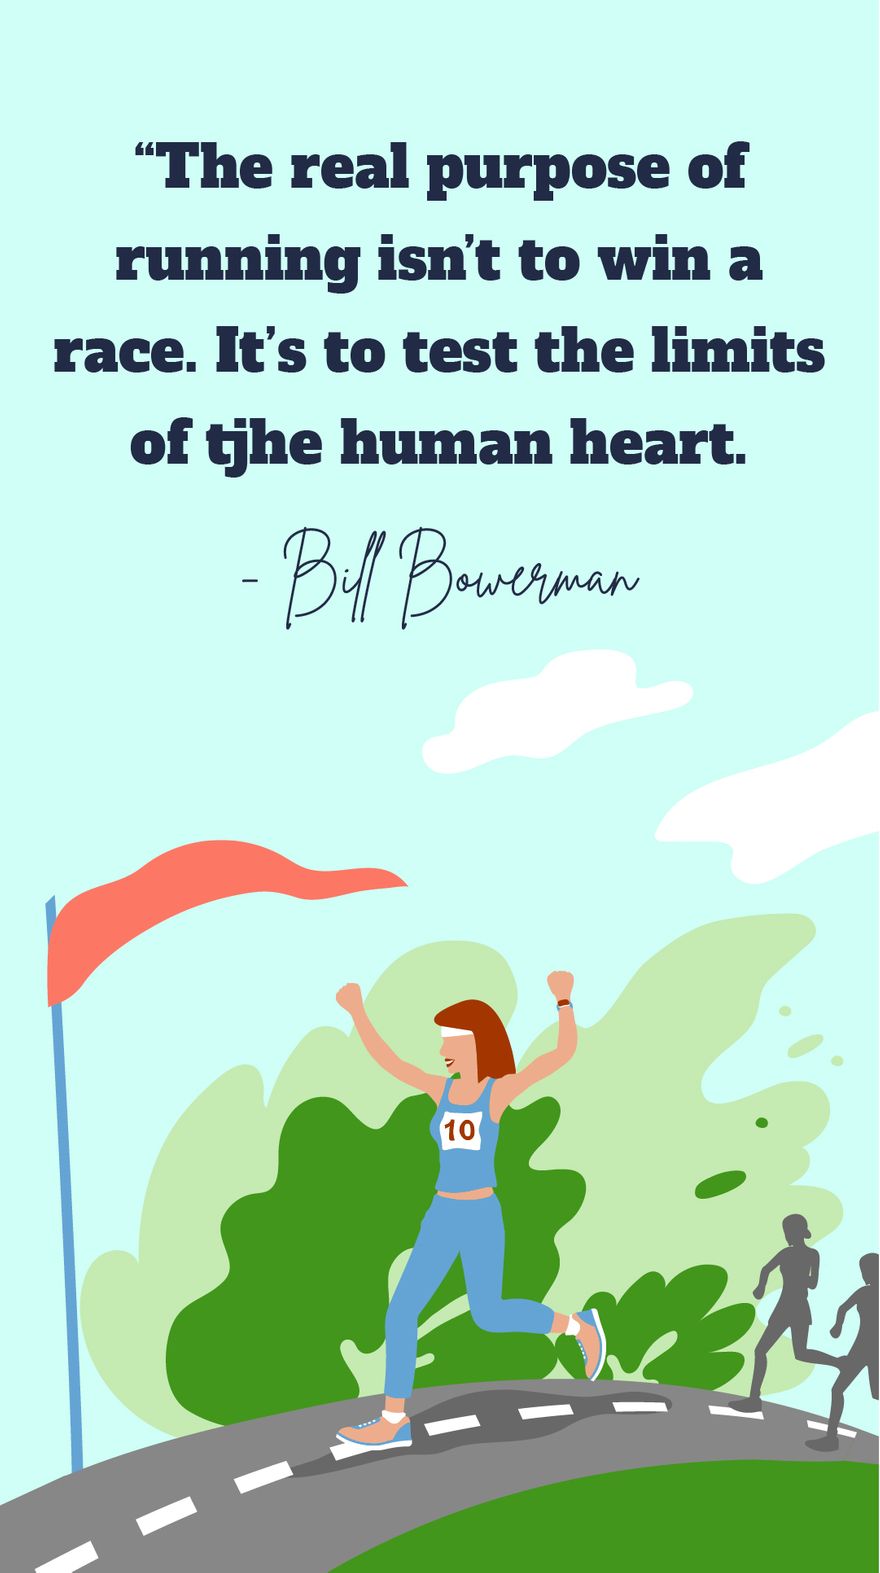 Bill Bowerman-The real purpose of running isn’t to win a race. It’s to test the limits of the human heart. in JPG